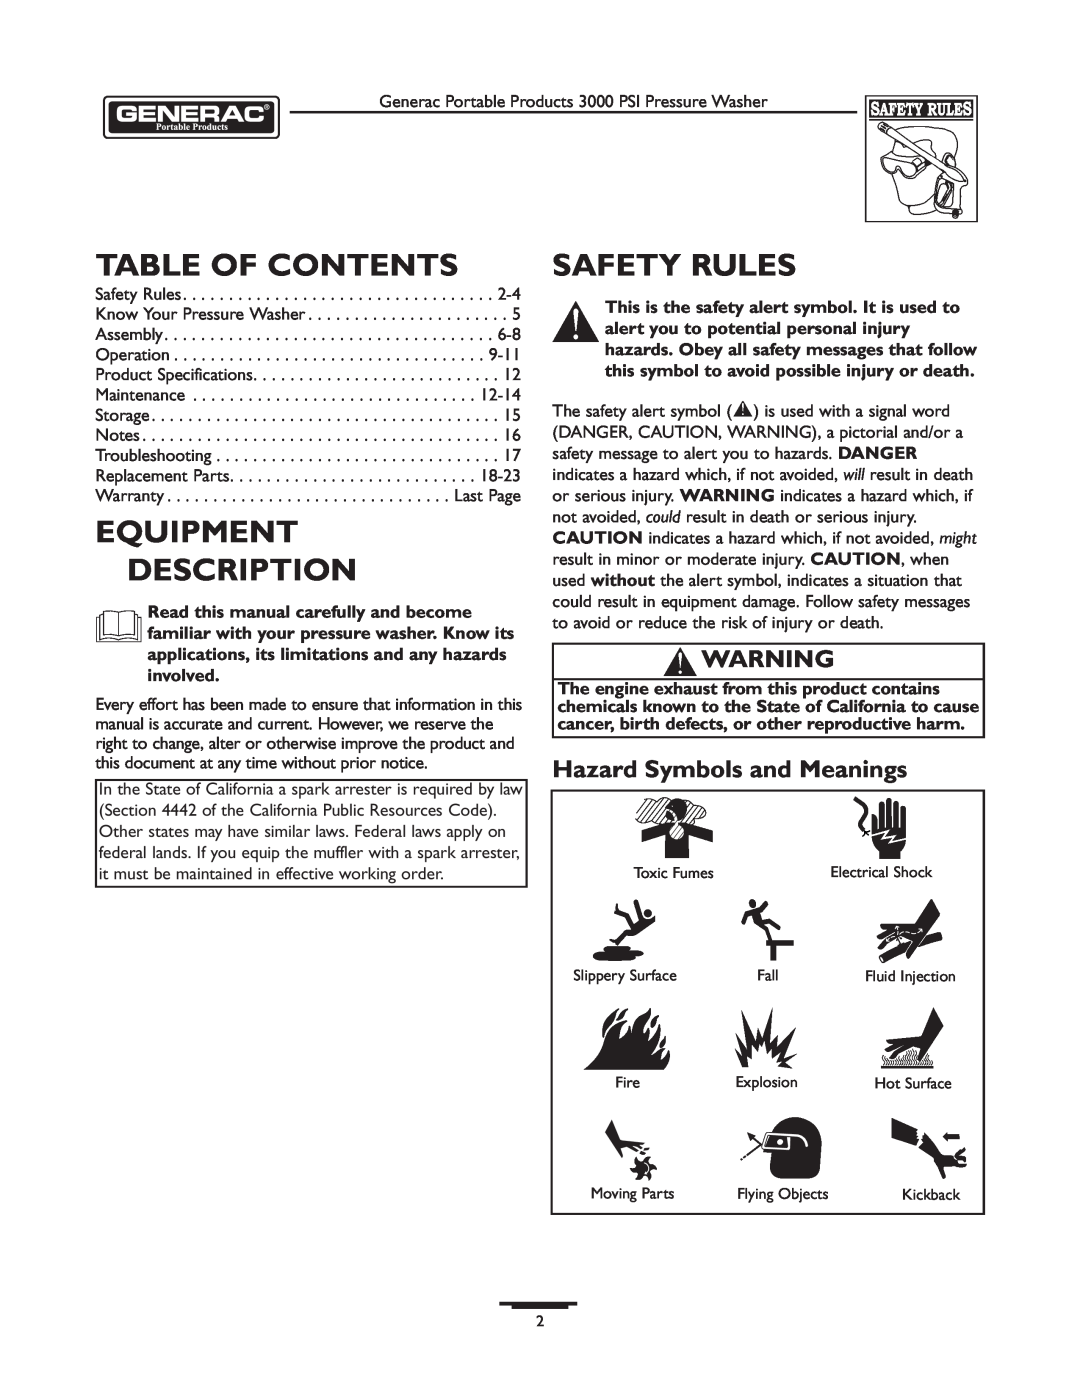 Briggs & Stratton 1418-2 owner manual Table Of Contents, Equipment Description, Safety Rules, Hazard Symbols and Meanings 